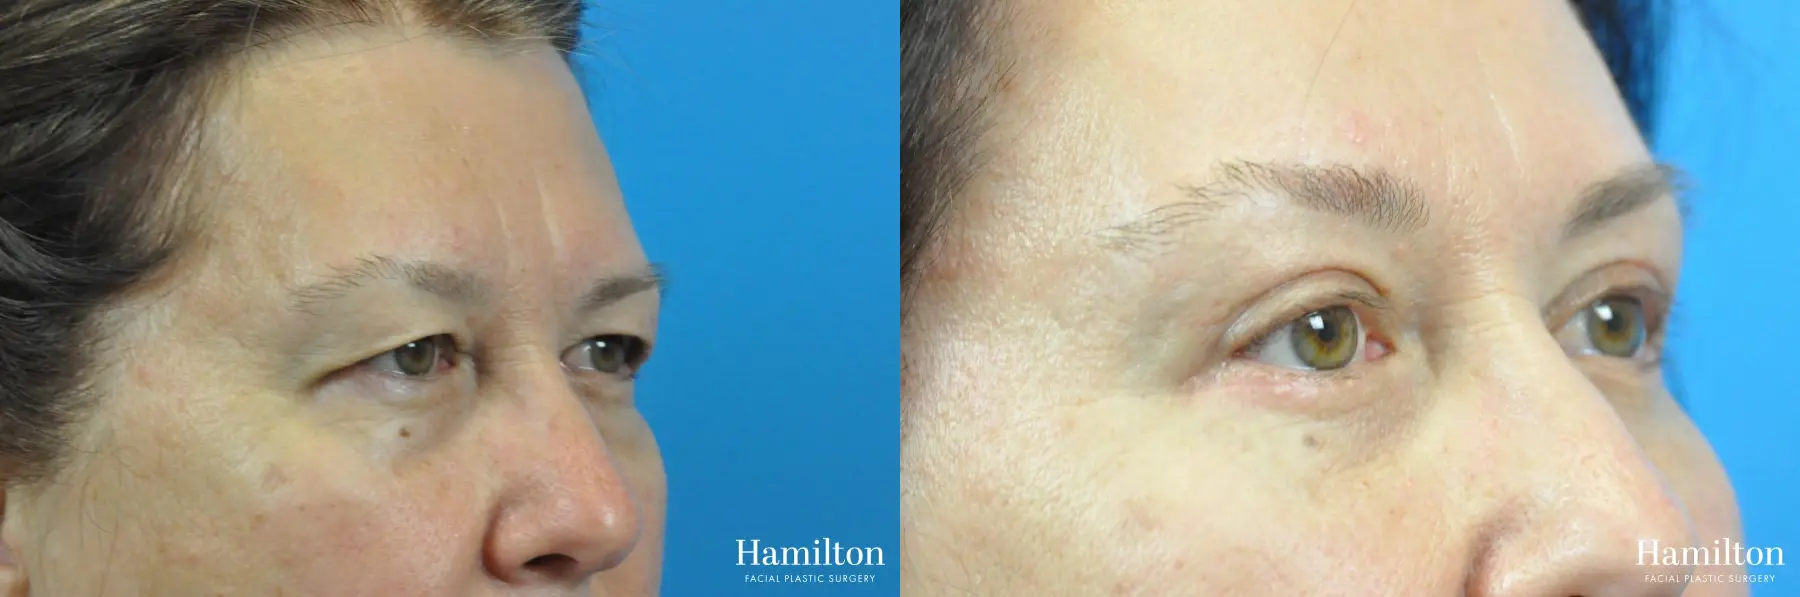 Brow Lift: Patient 6 - Before and After  